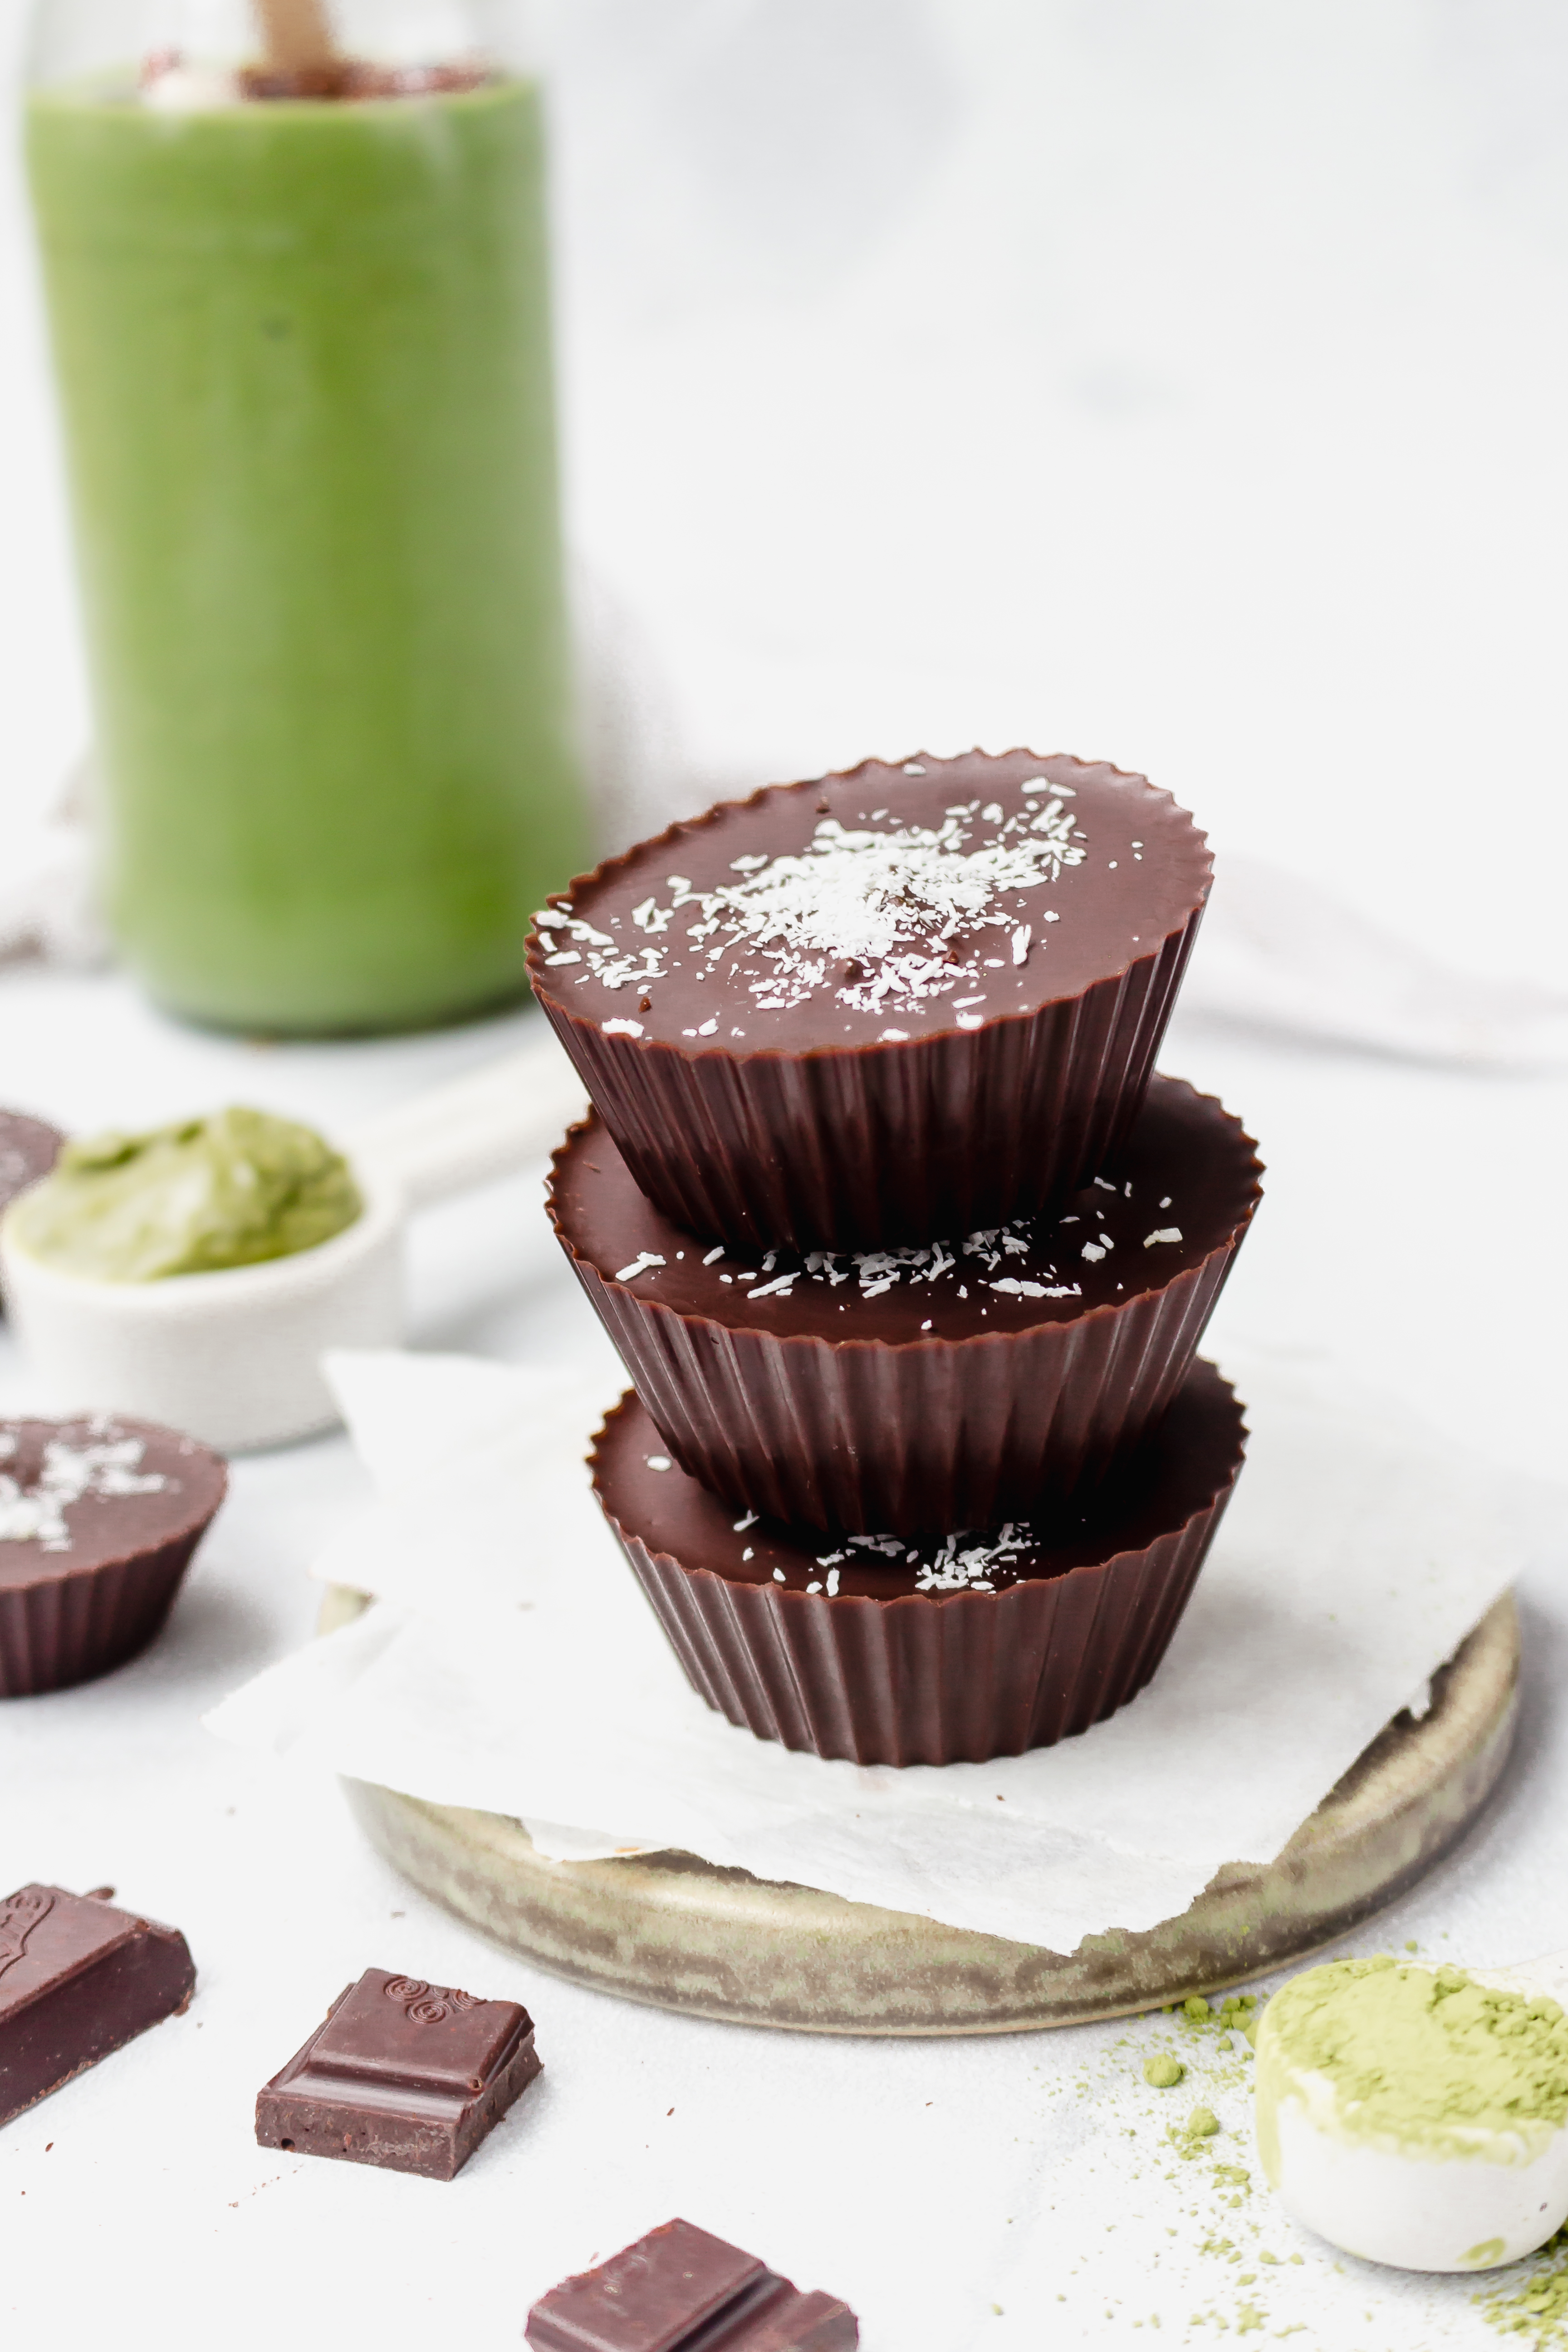 Minty Matcha Chocolate Nut Butter Cups